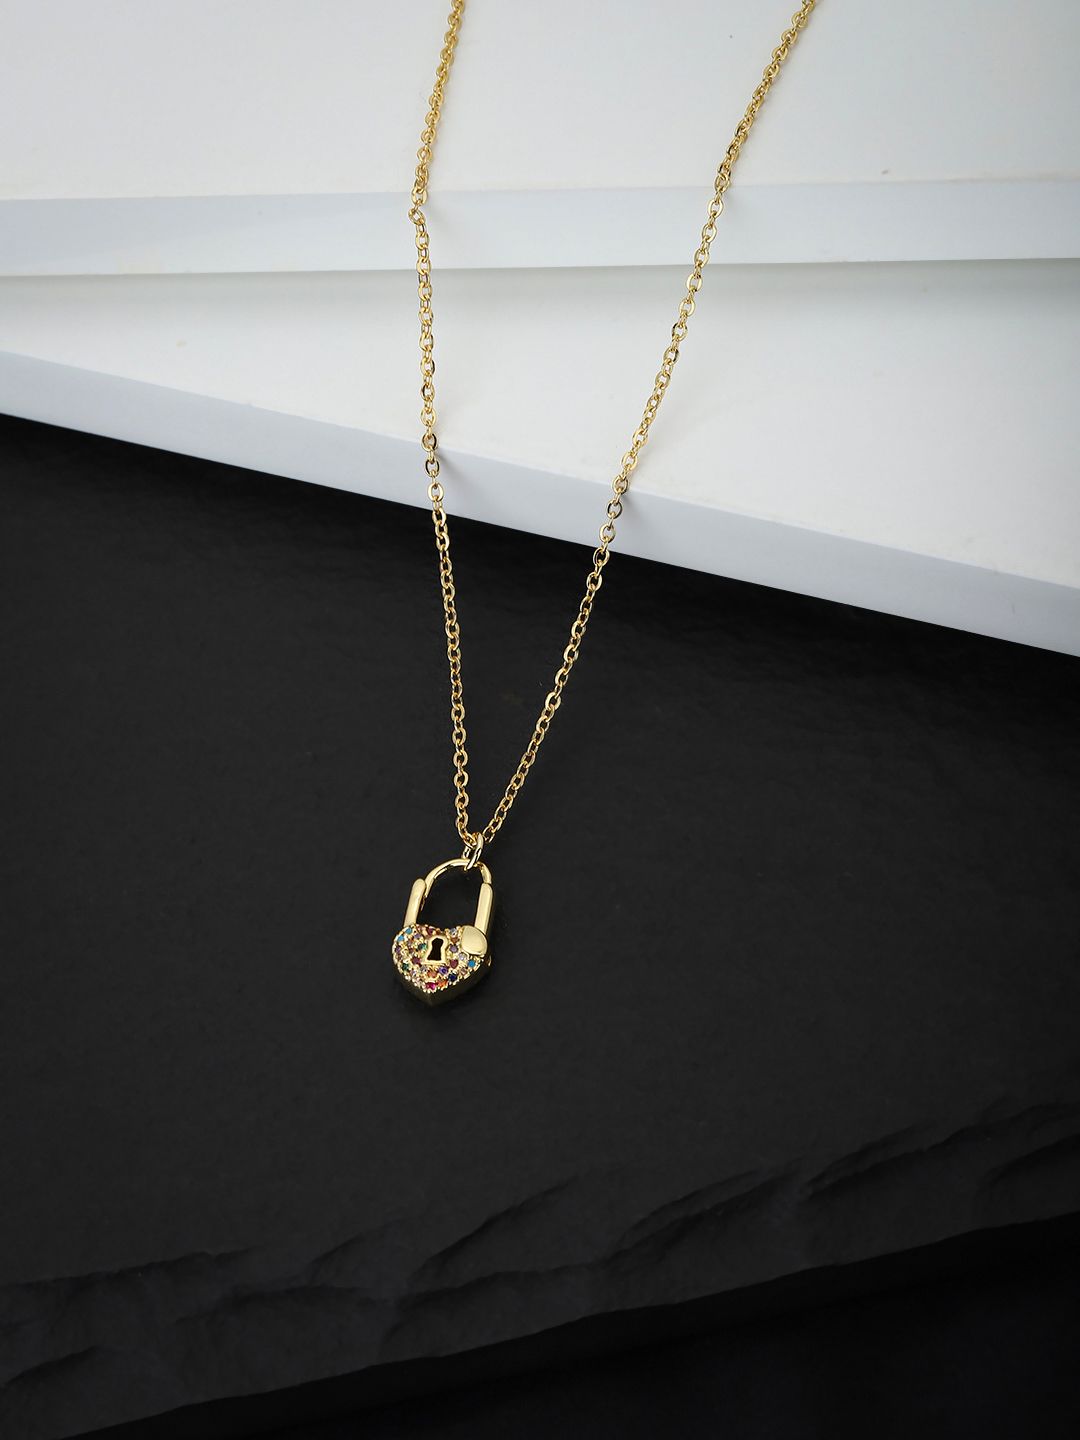 Carlton London Gold-Plated CZ-Studded Heart-Shaped Lock Necklace Price in India